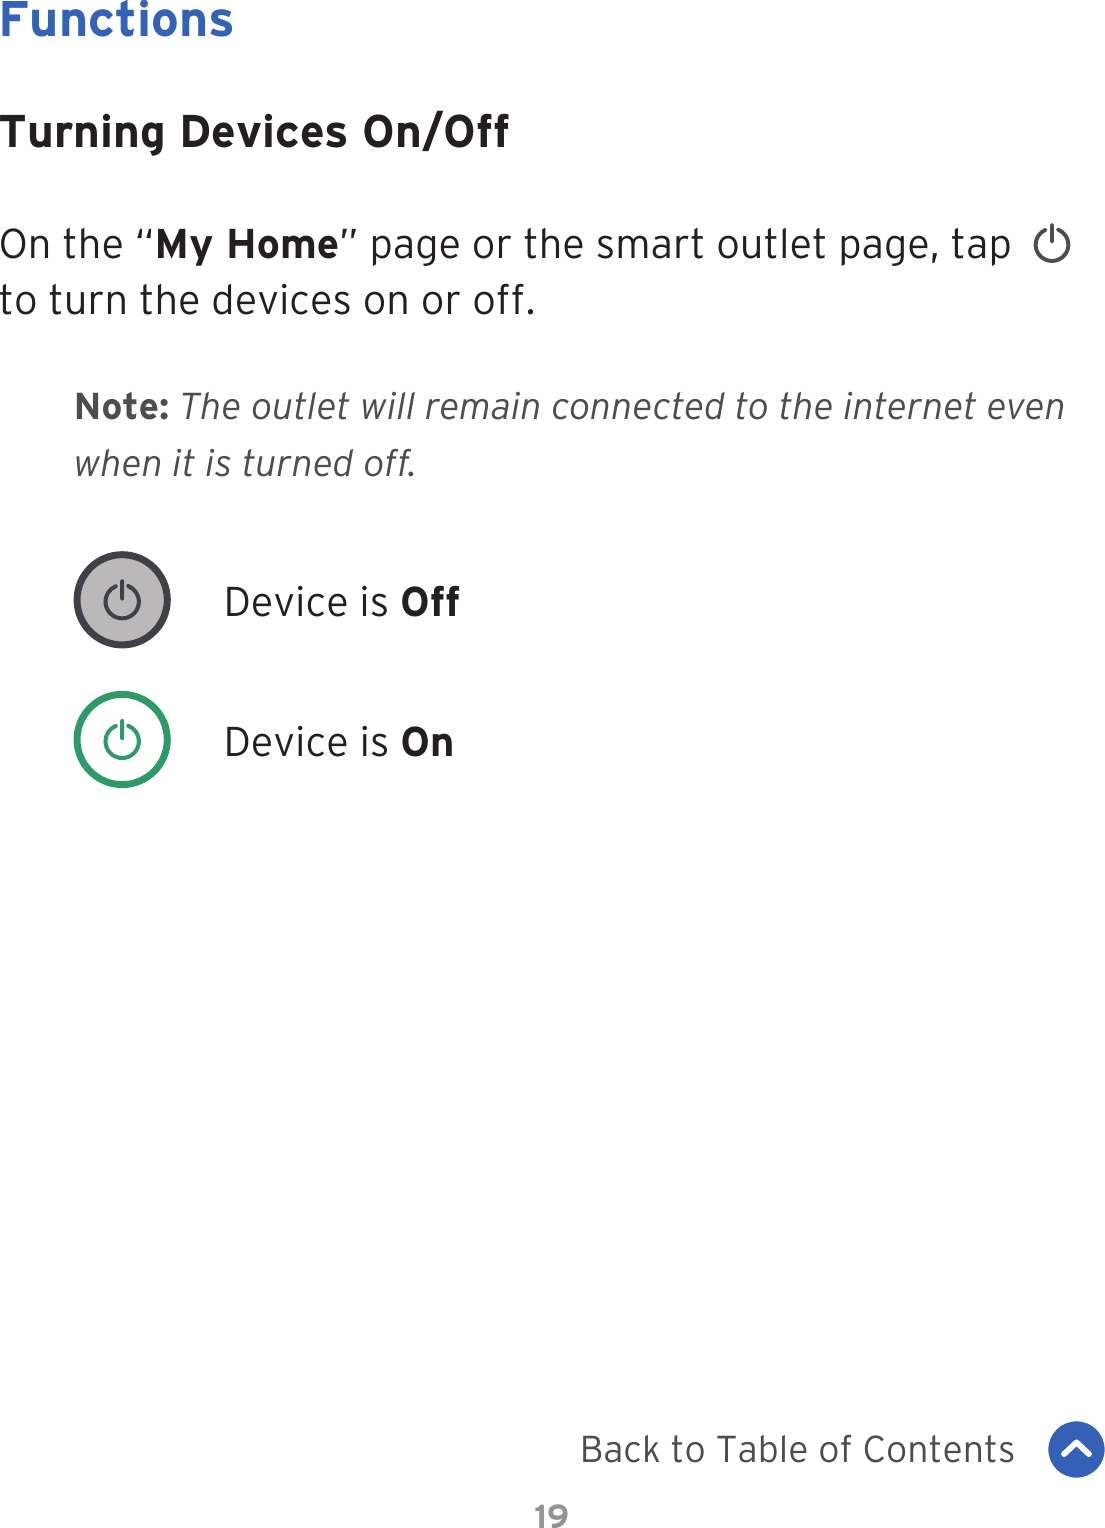 19FunctionsTurning Devices On/Off On the “My Home” page or the smart outlet page, tap    to turn the devices on or off.Device is OffDevice is OnNote: The outlet will remain connected to the internet even when it is turned off.Back to Table of Contents